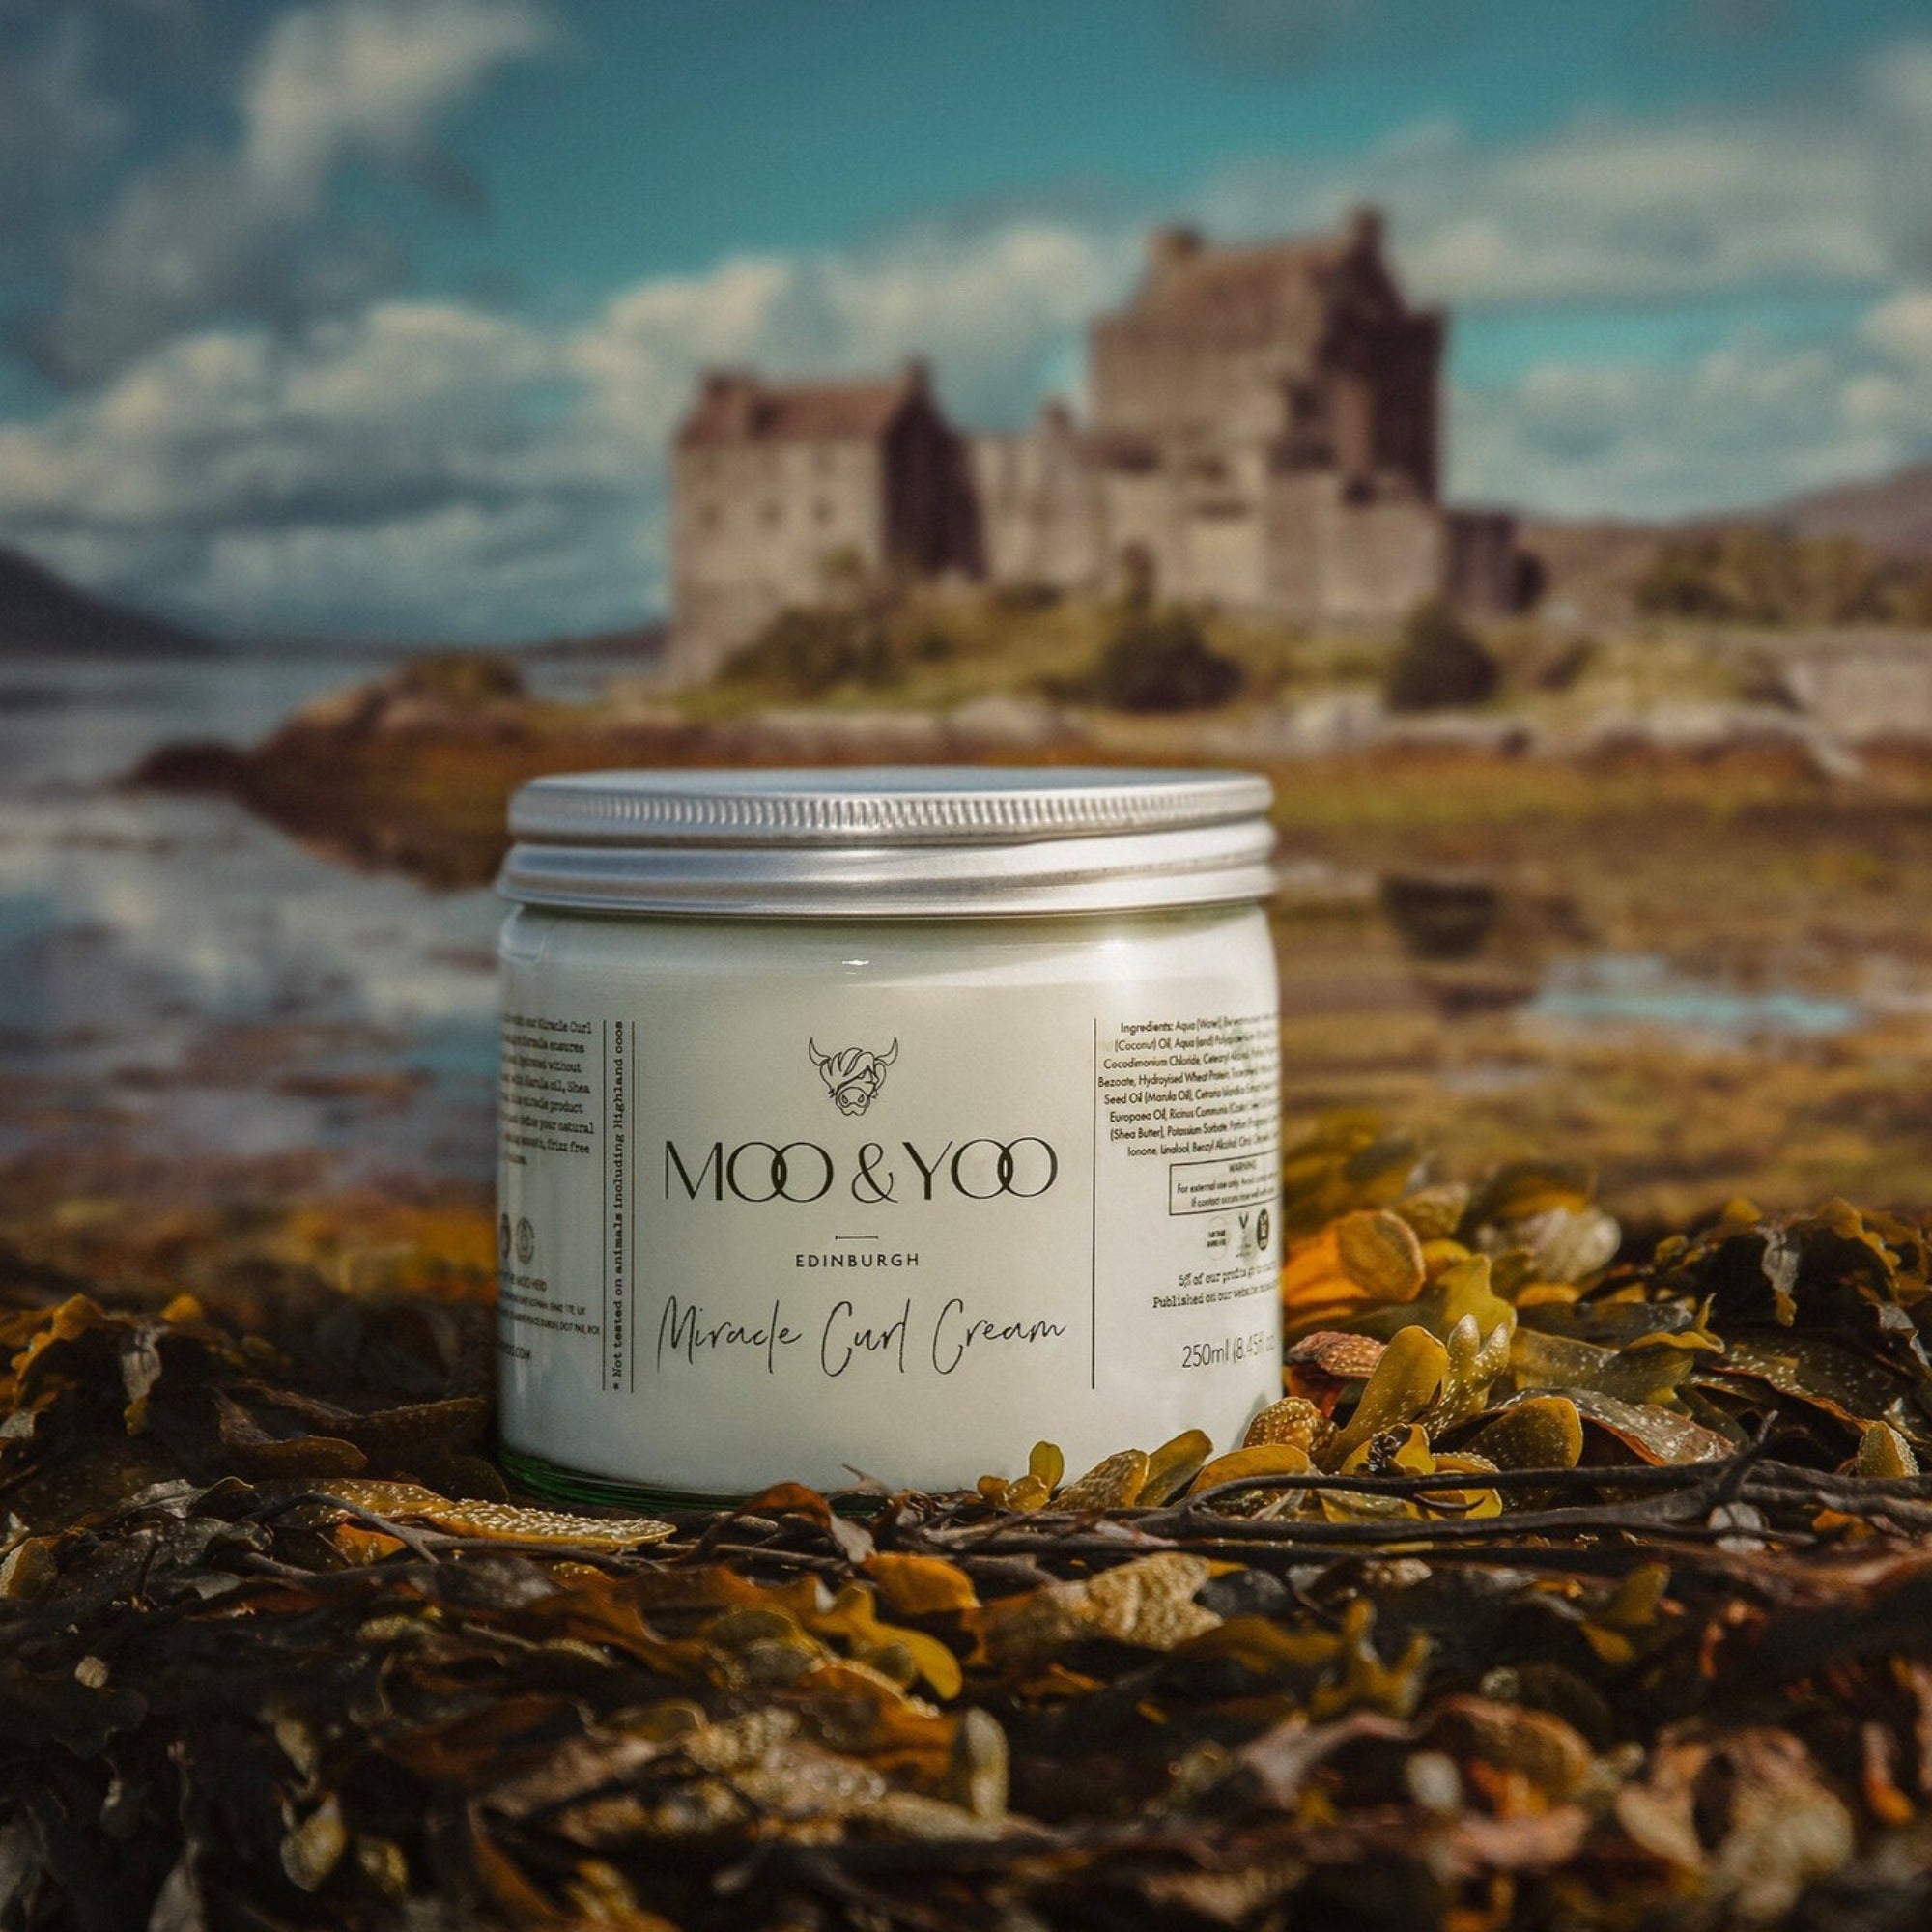 A glass jar of Moo and Yoo Miracle Curl Cream with an aluminium lid. It is sitting on some seaweed on the side of a Scottish Loch with a castle in the background.